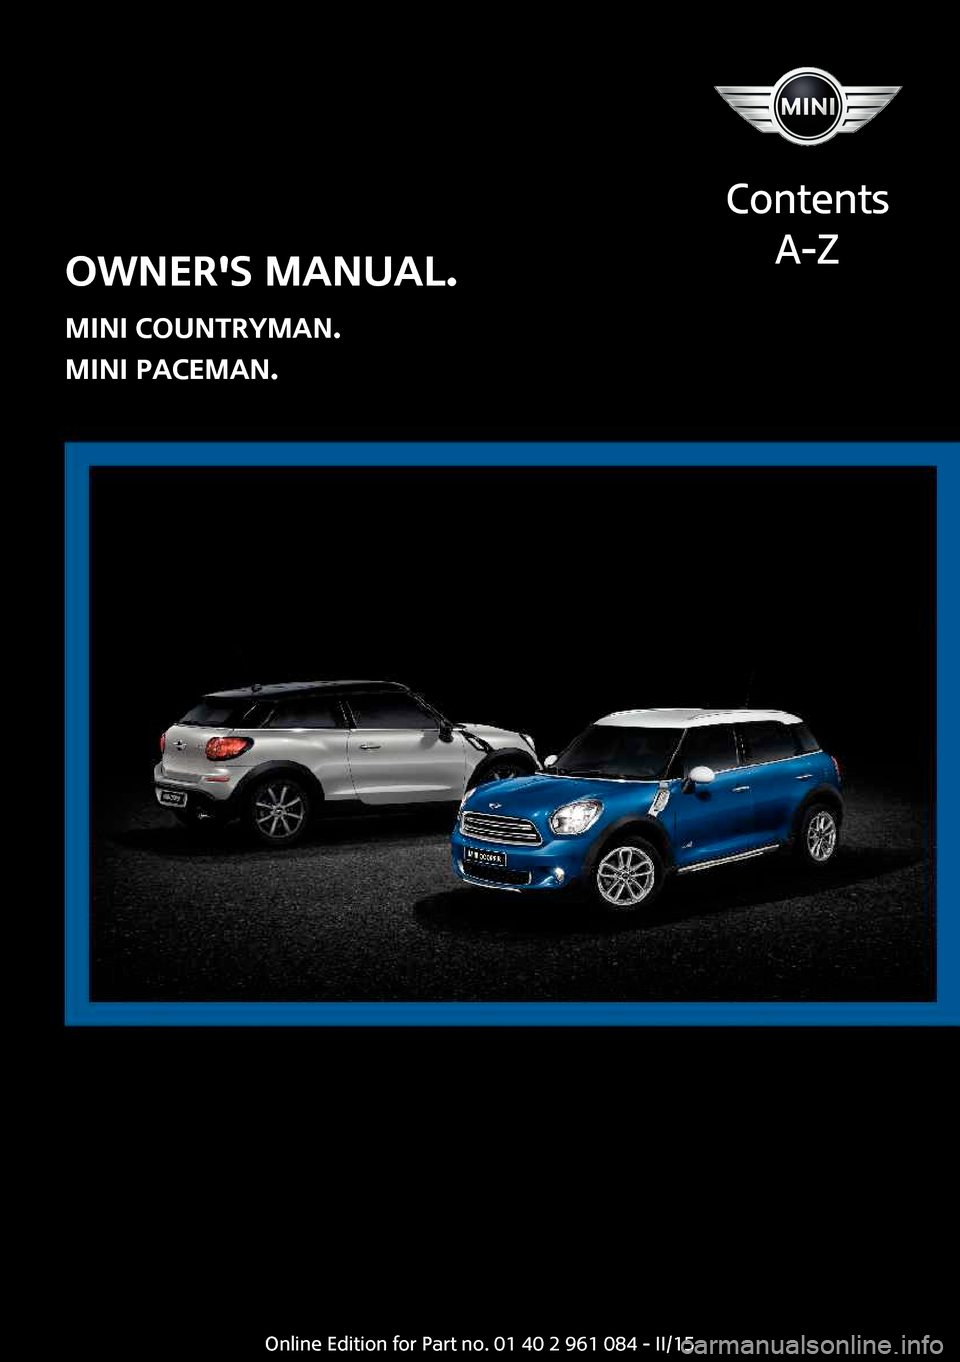 MINI Paceman 2015  Owners Manual OWNERS MANUAL.
MINI COUNTRYMAN.
MINI PACEMAN.
Contents
A-ZOnline Edition for Part no. 01 40 2 961 084 - II/15  